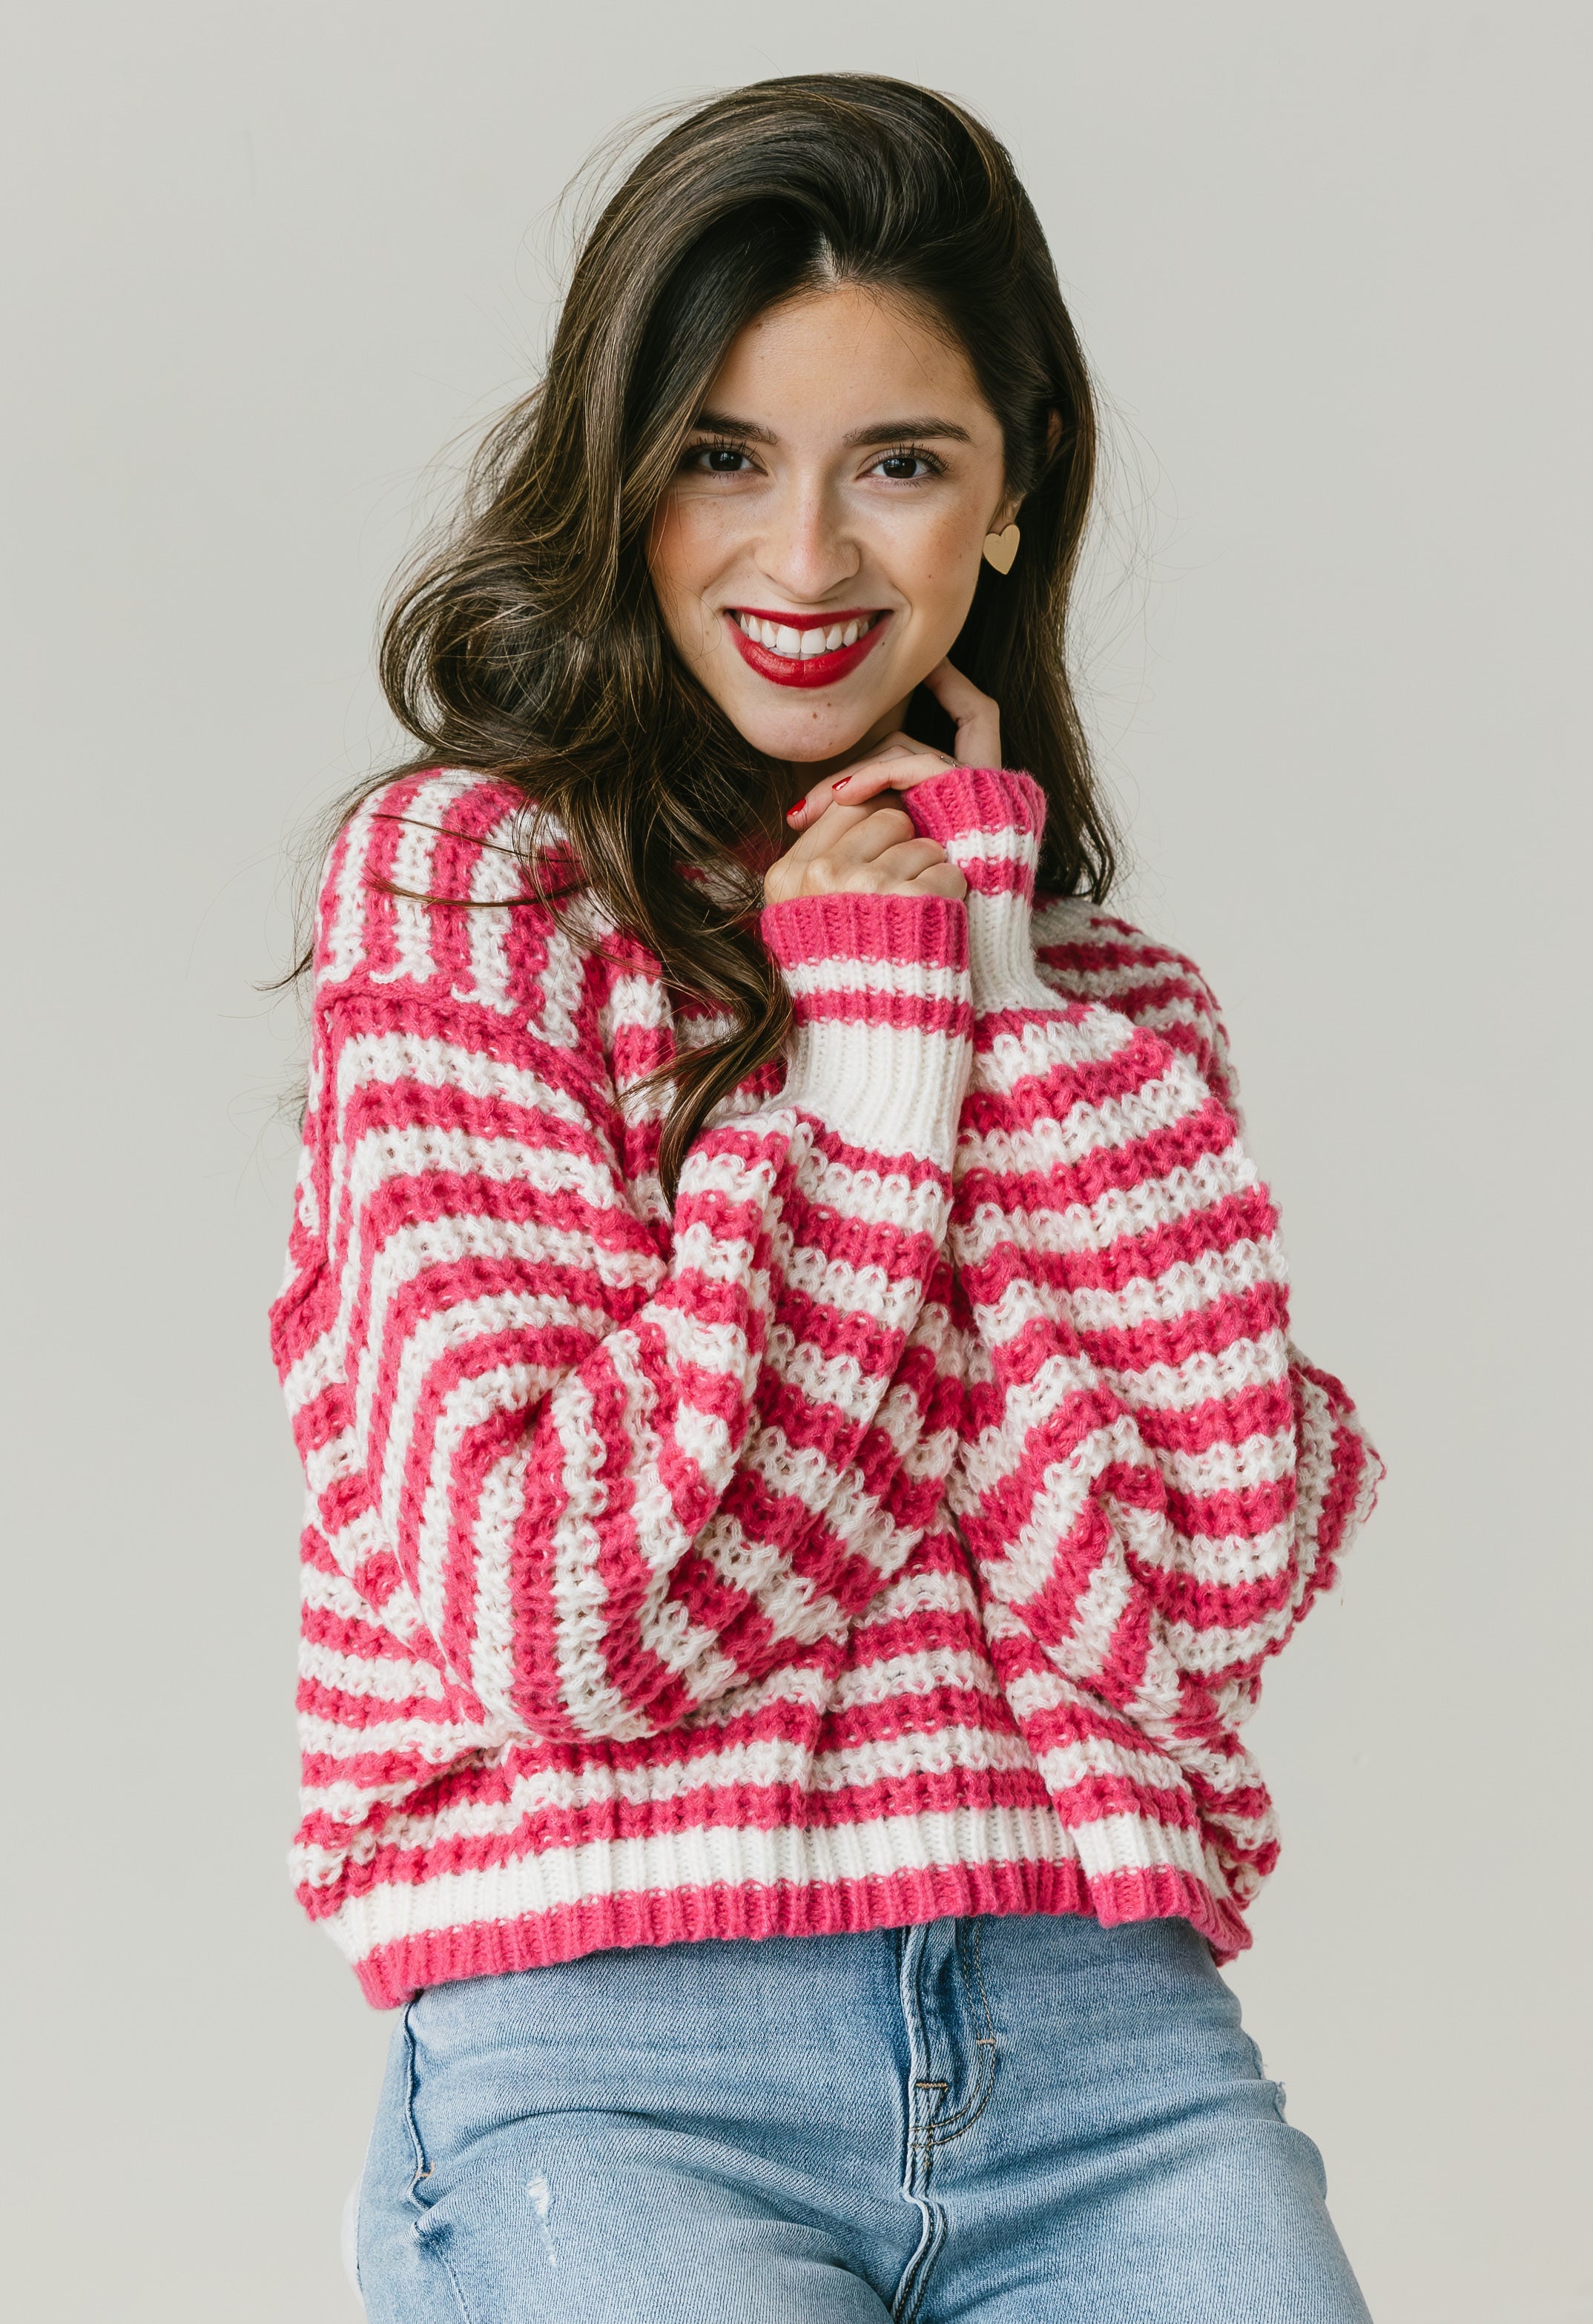 Sparks Fly Sweater - HOT PINK - willows clothing SWEATER